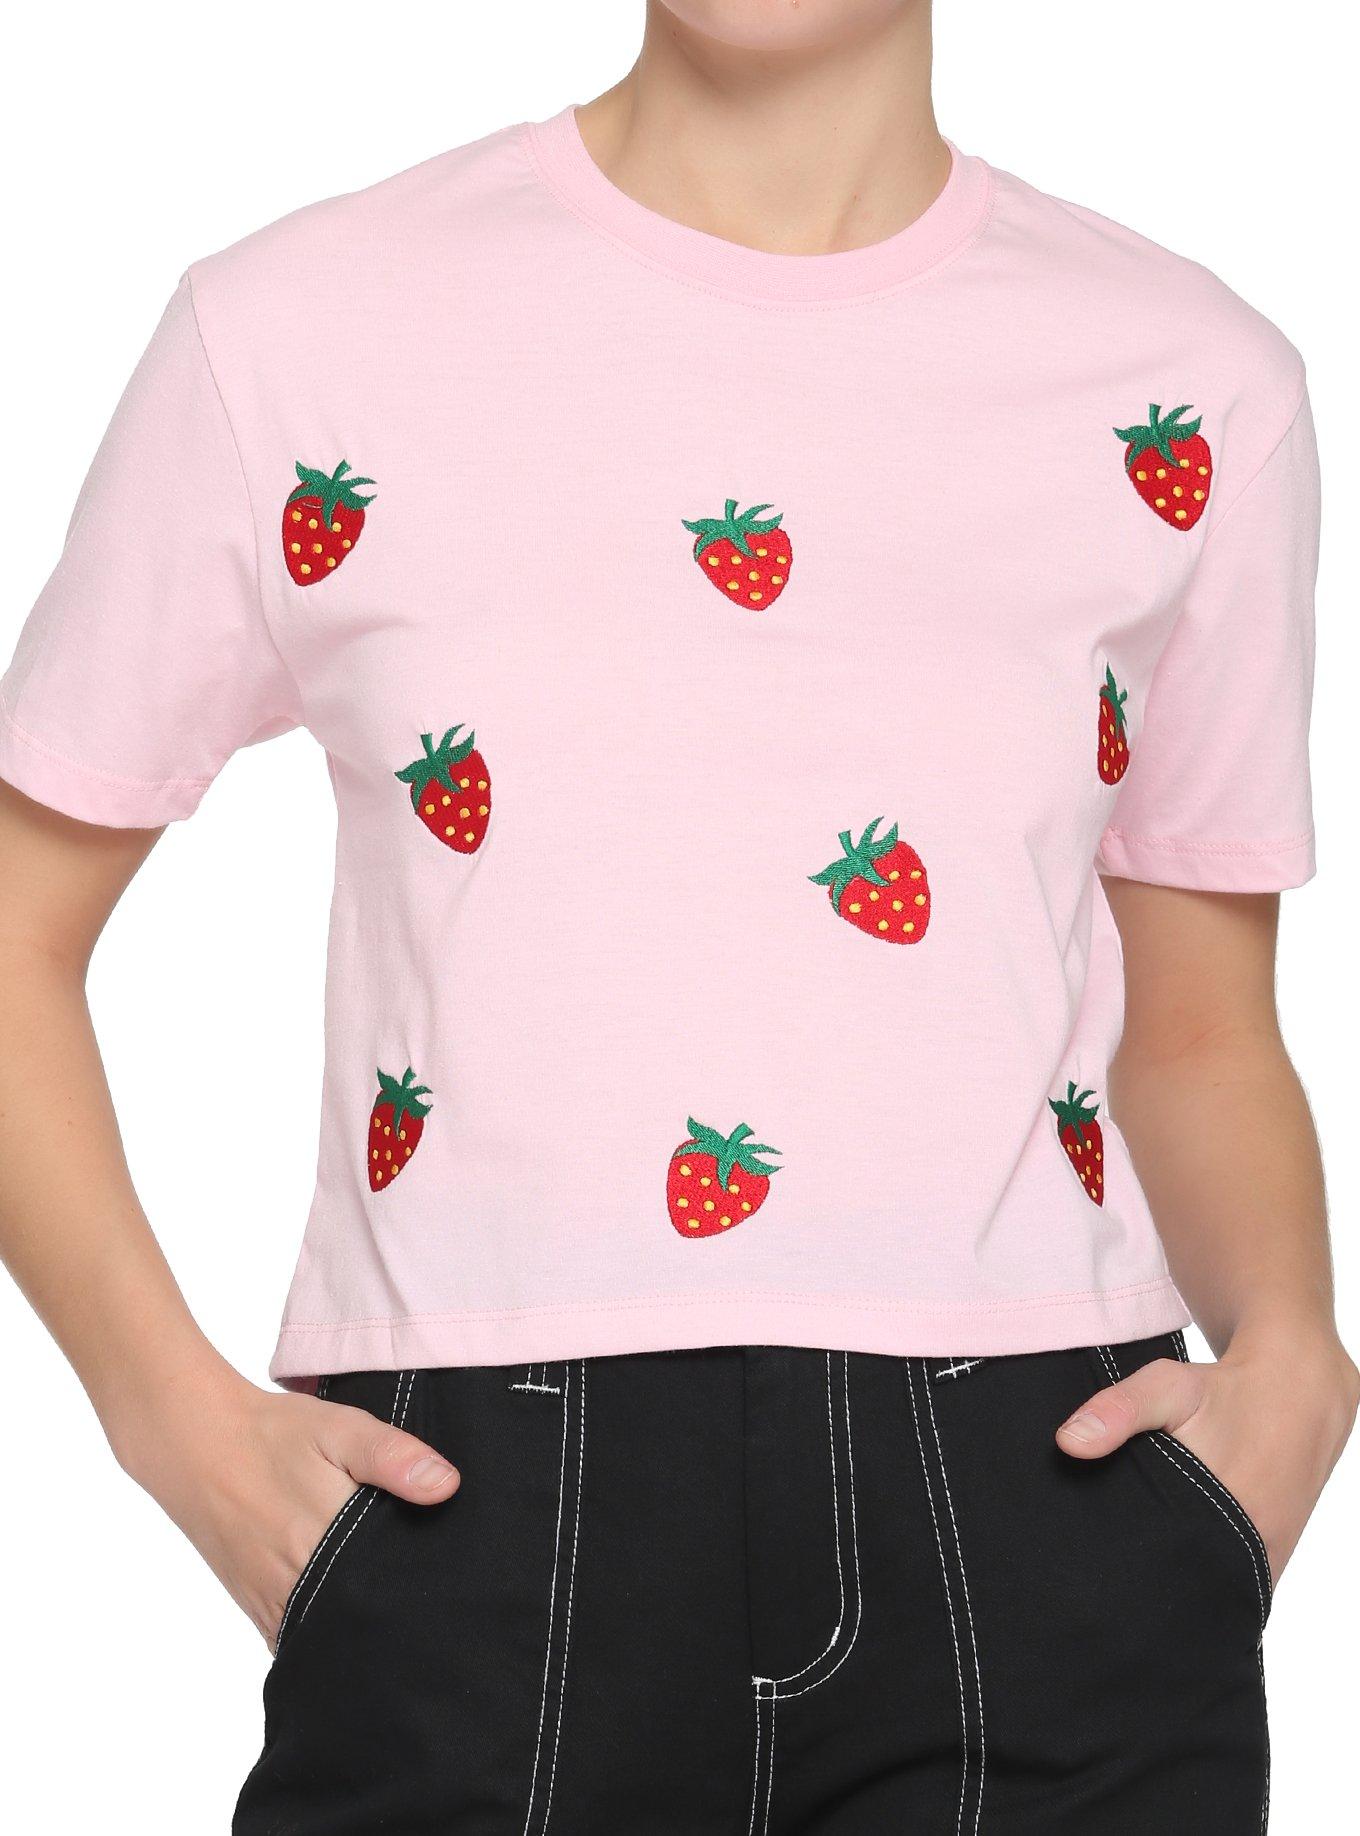 Embroidered Strawberry Boxy Girls Crop T-Shirt, PINK, hi-res